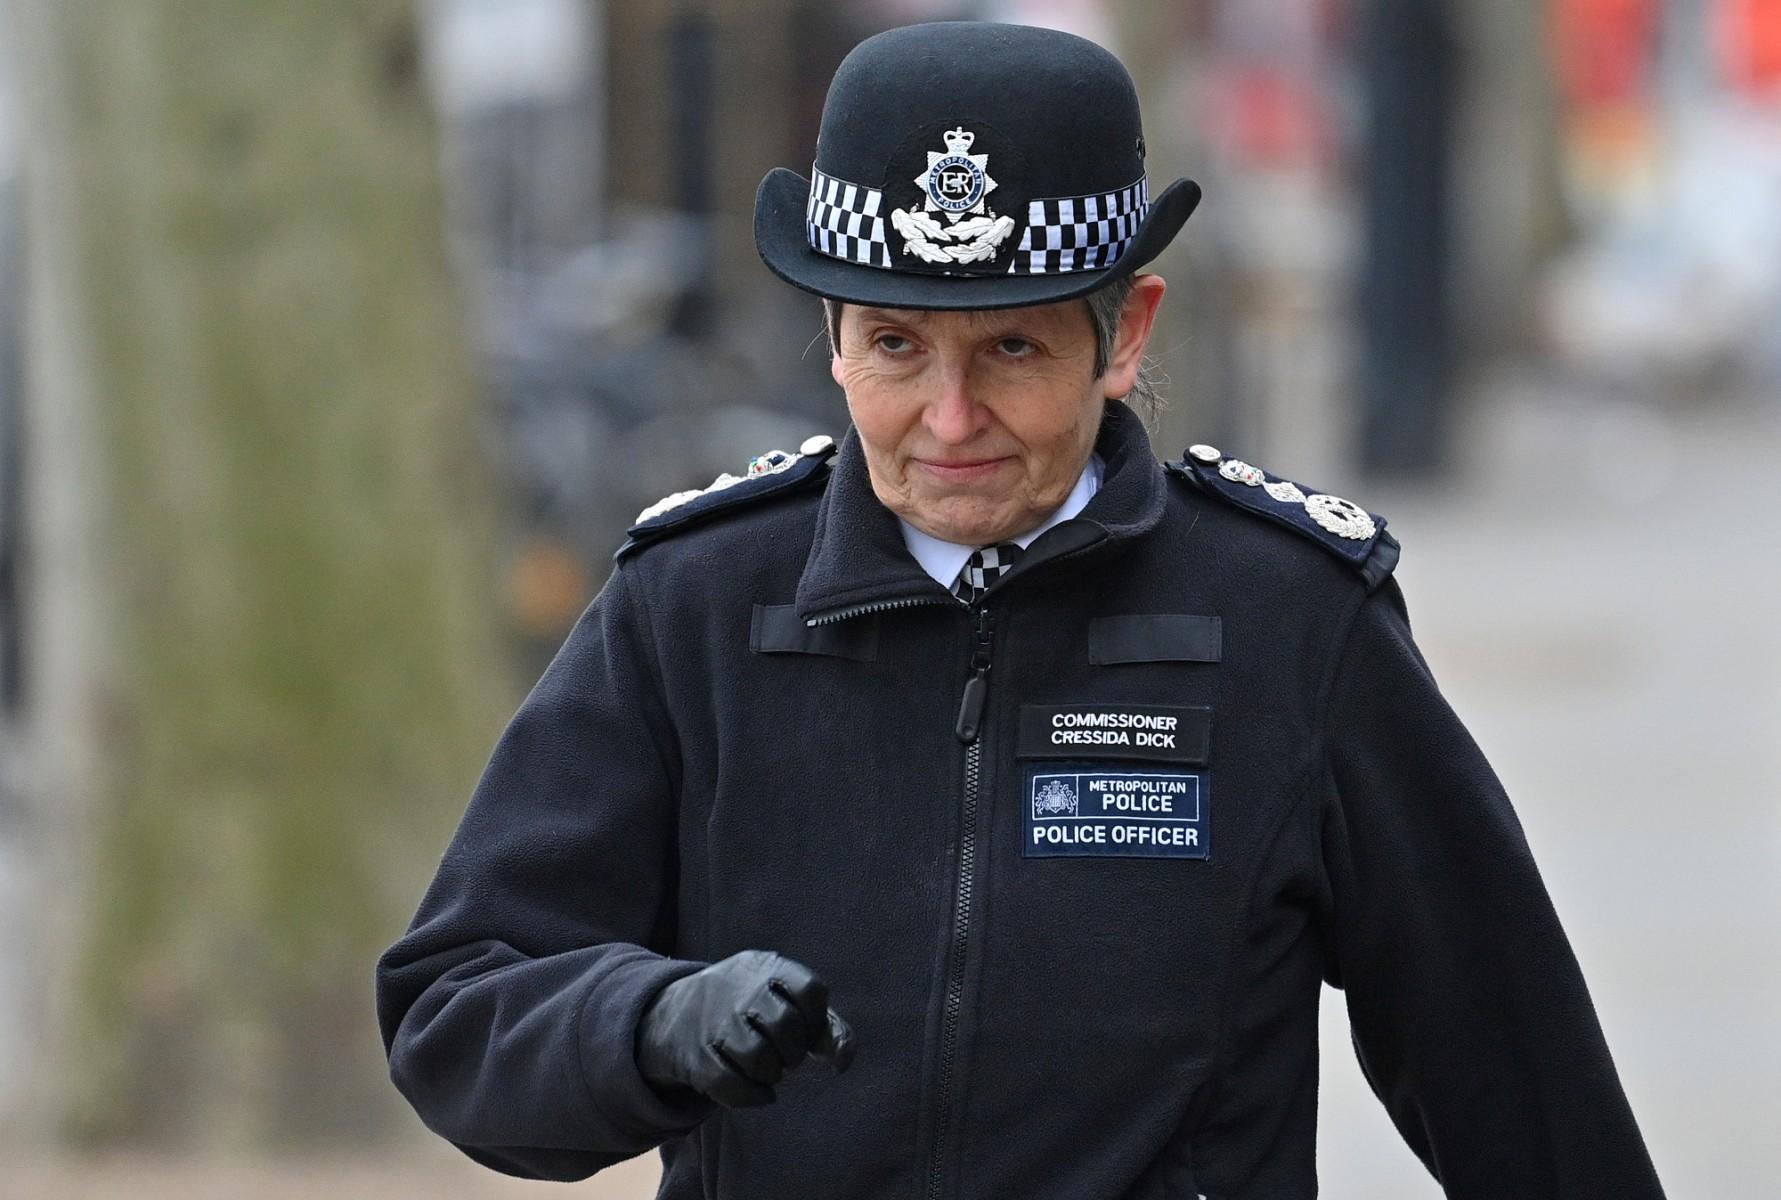 Metropolitan Police Commissioner Cressida Dick walks towards New Scotland Yard in central London in this file photo taken on Jan 25. Photo: AFP